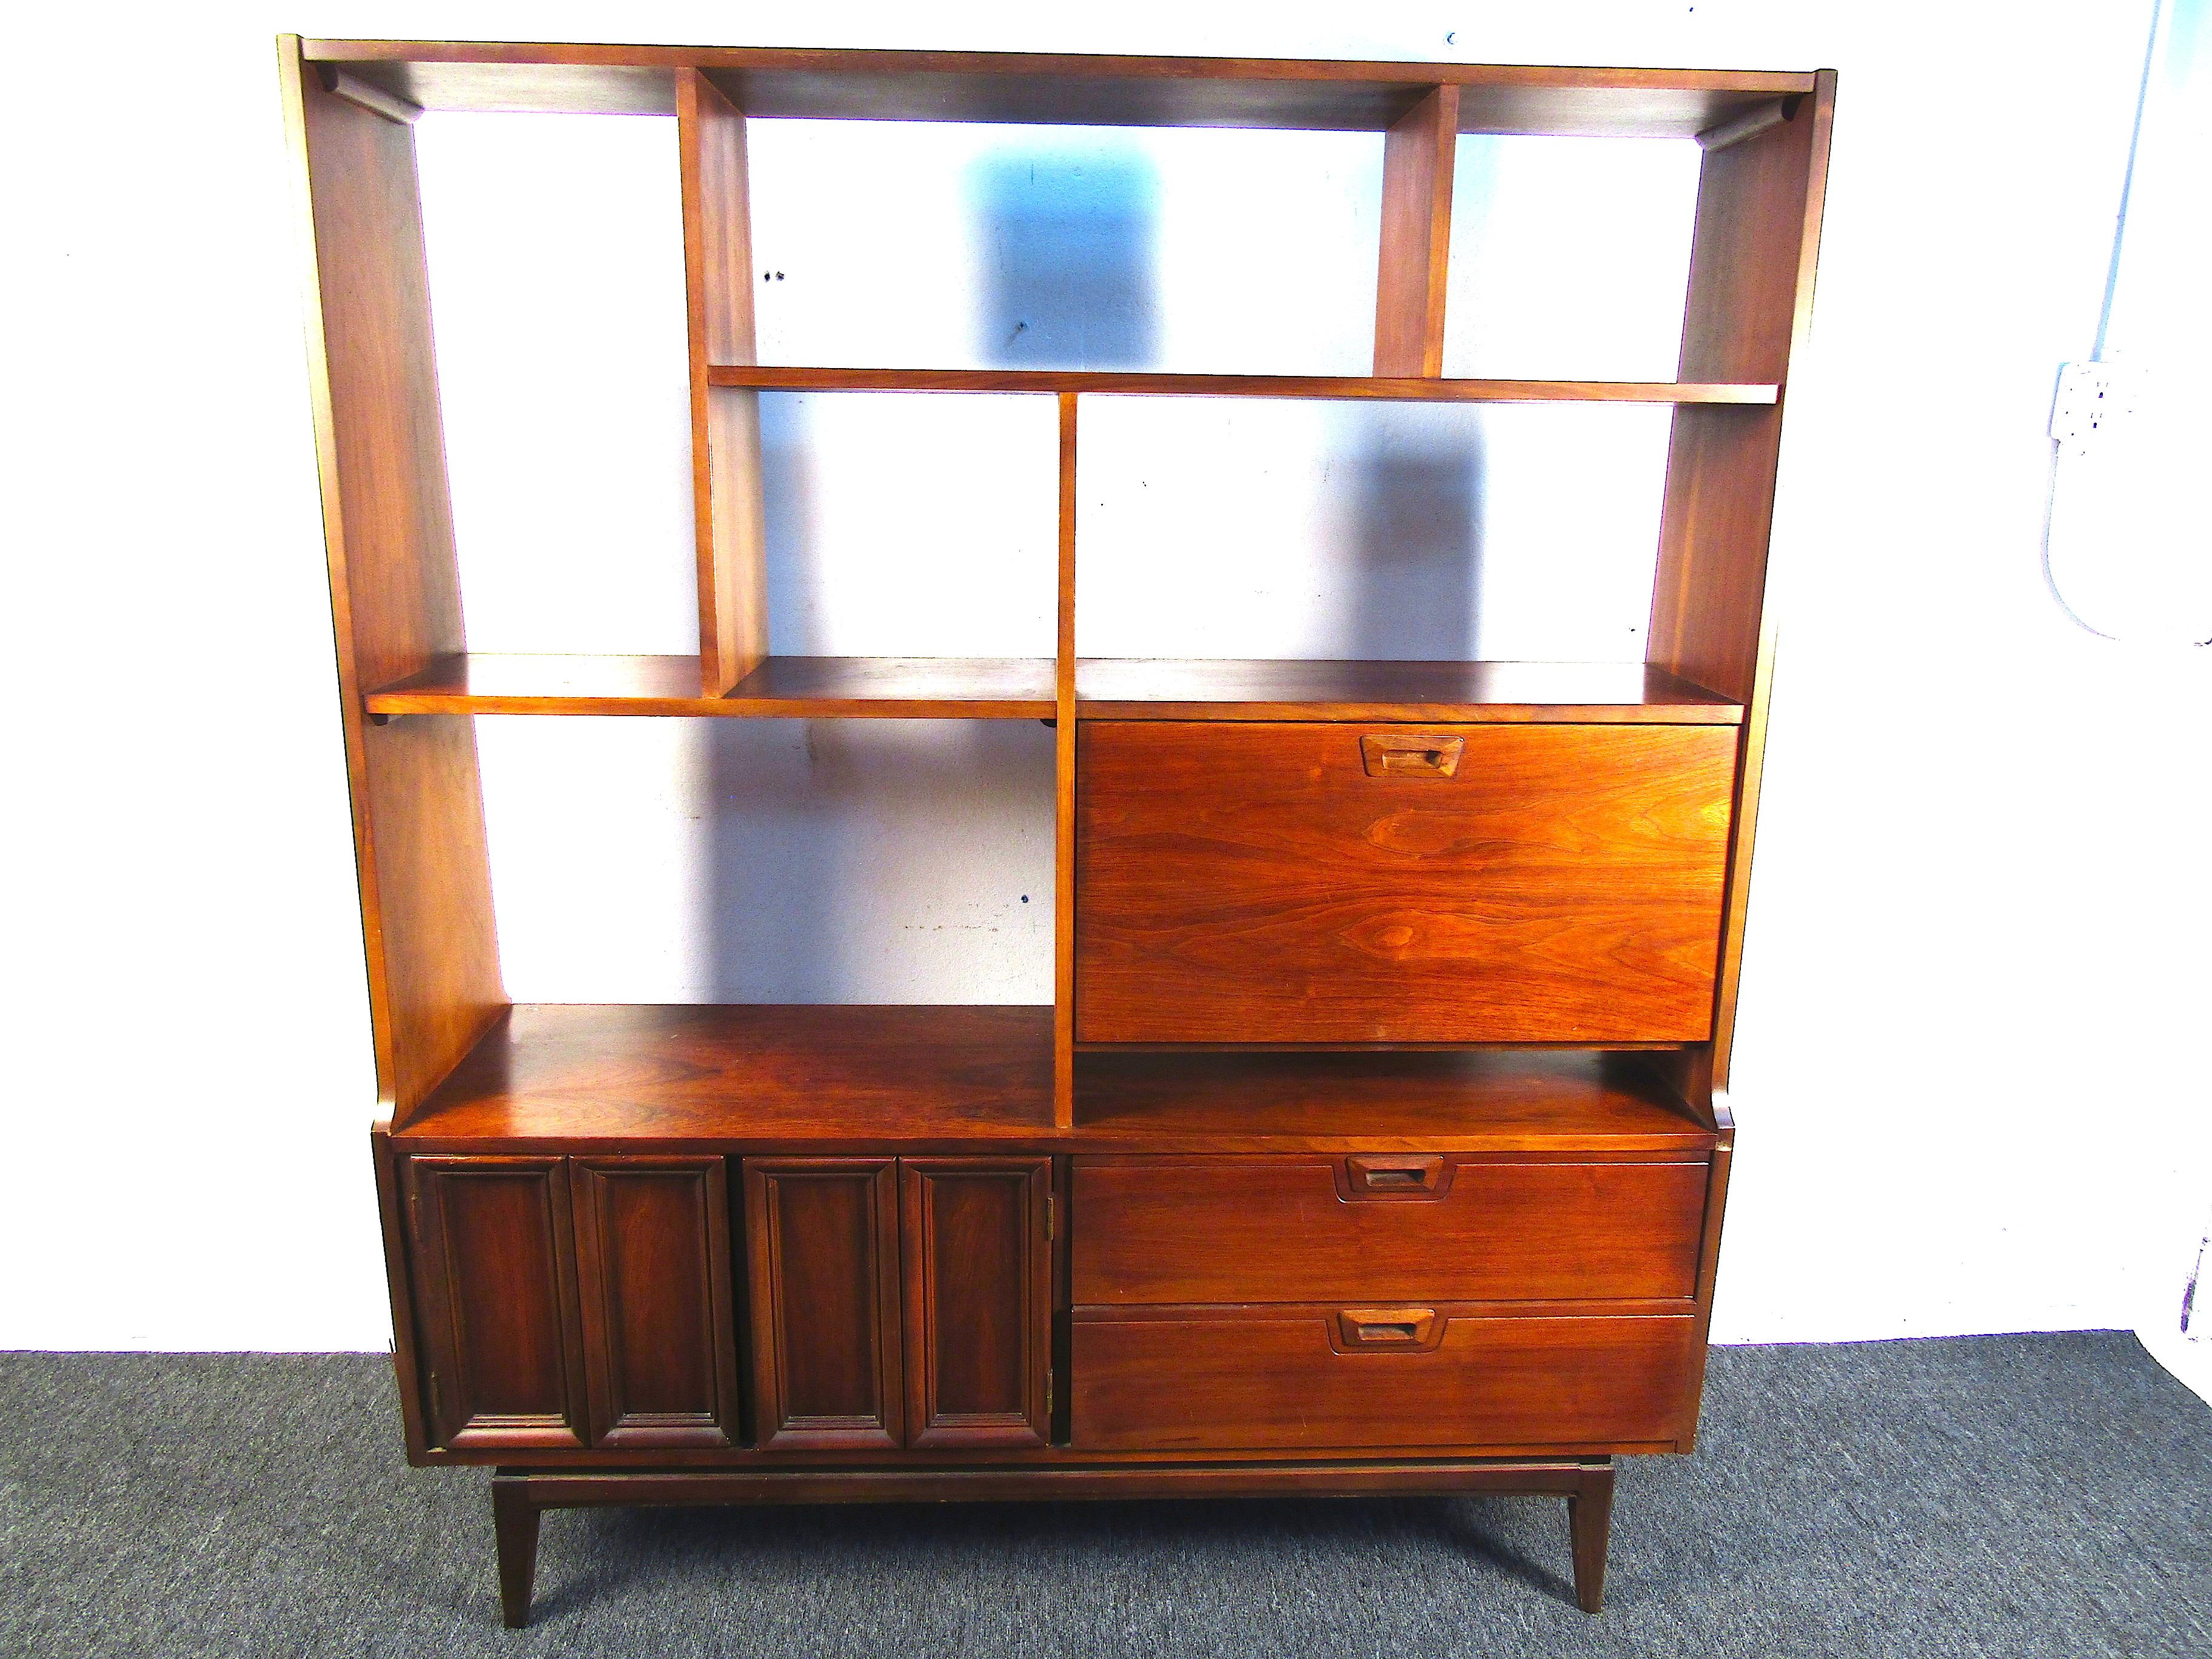 This beautiful midcentury wall unit is perfect for storing all those old books, records, or anything you can imagine. With the impressive overall size and ample storage, this piece is both functional and beautiful. Please confirm the item's location